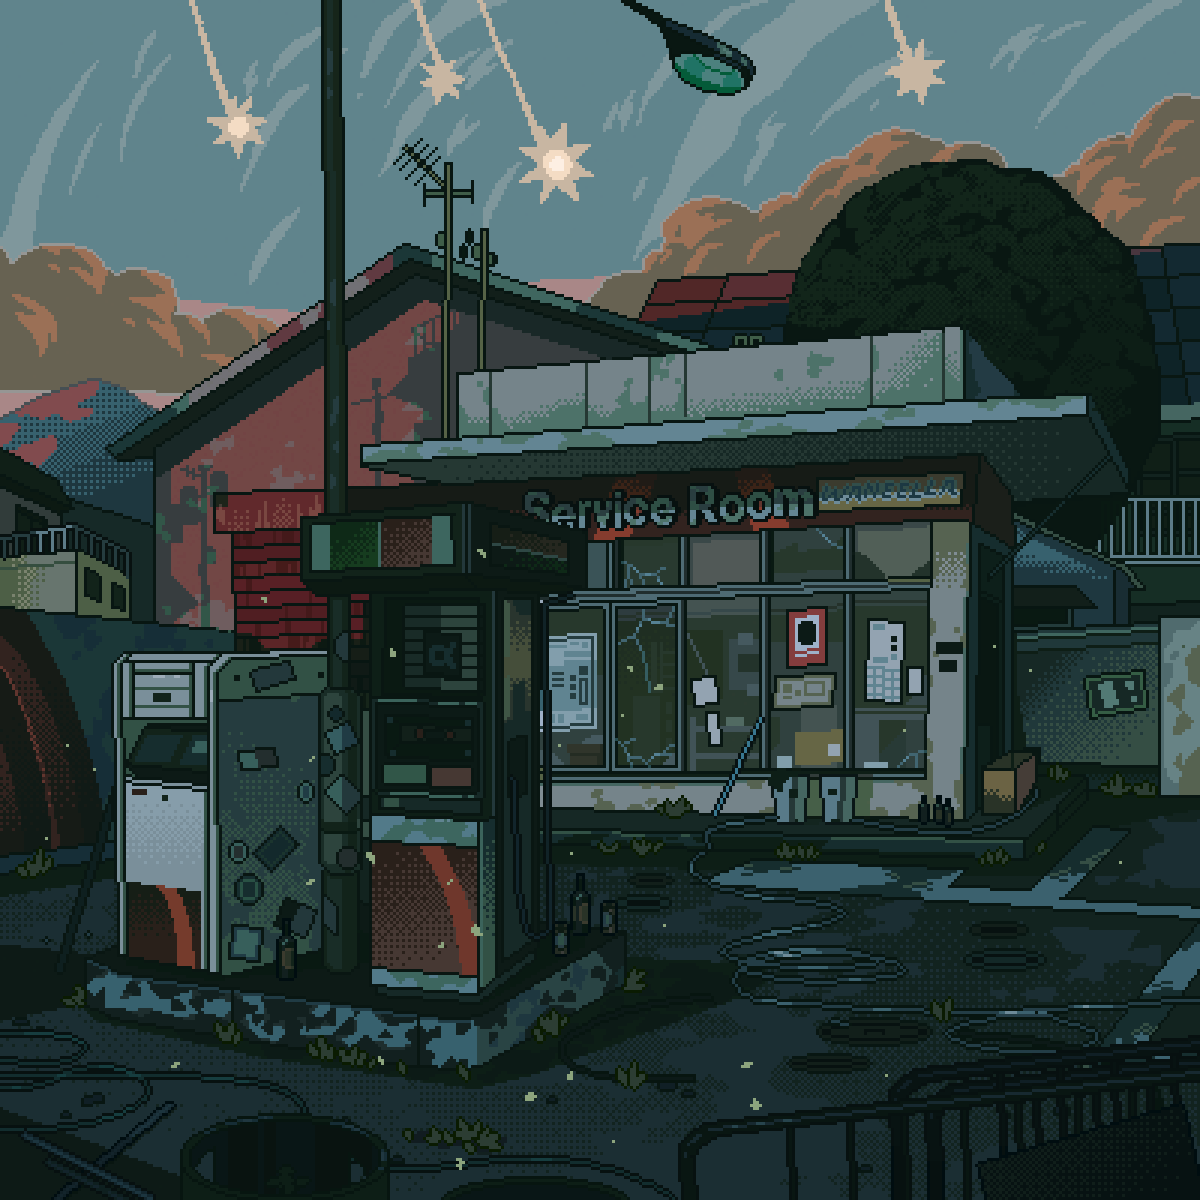 A gas station is shown in an artistic style - Pixel art